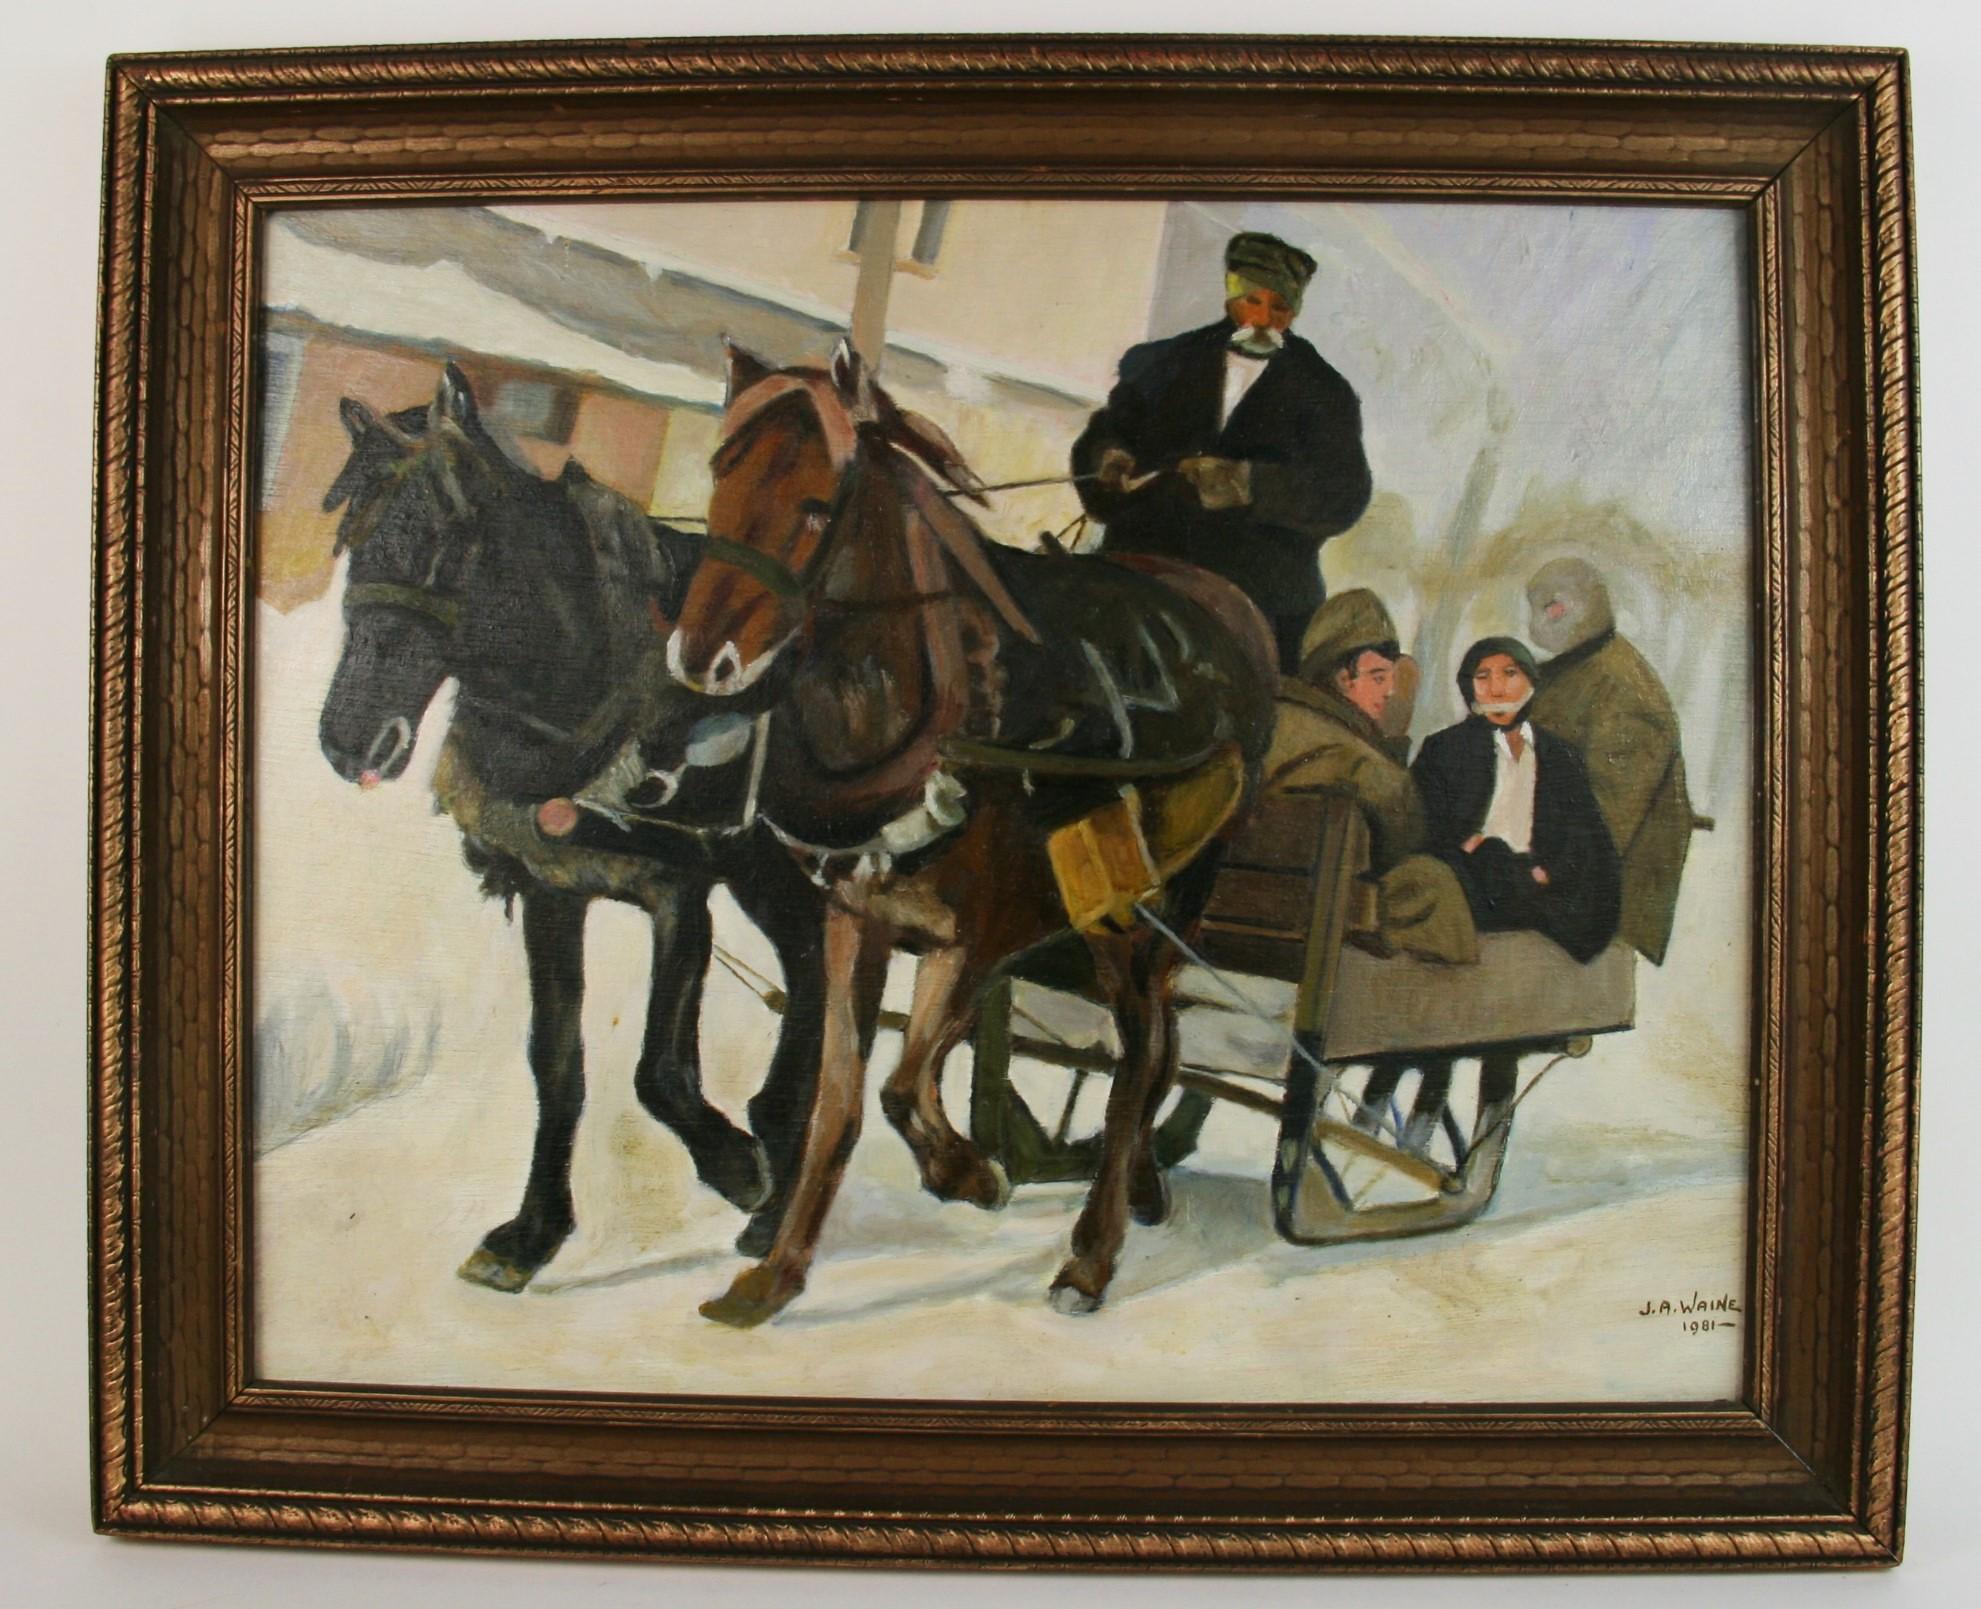 3288 Winter horse drawn carriage 
Oil on board
Image size 19.5x 15.5